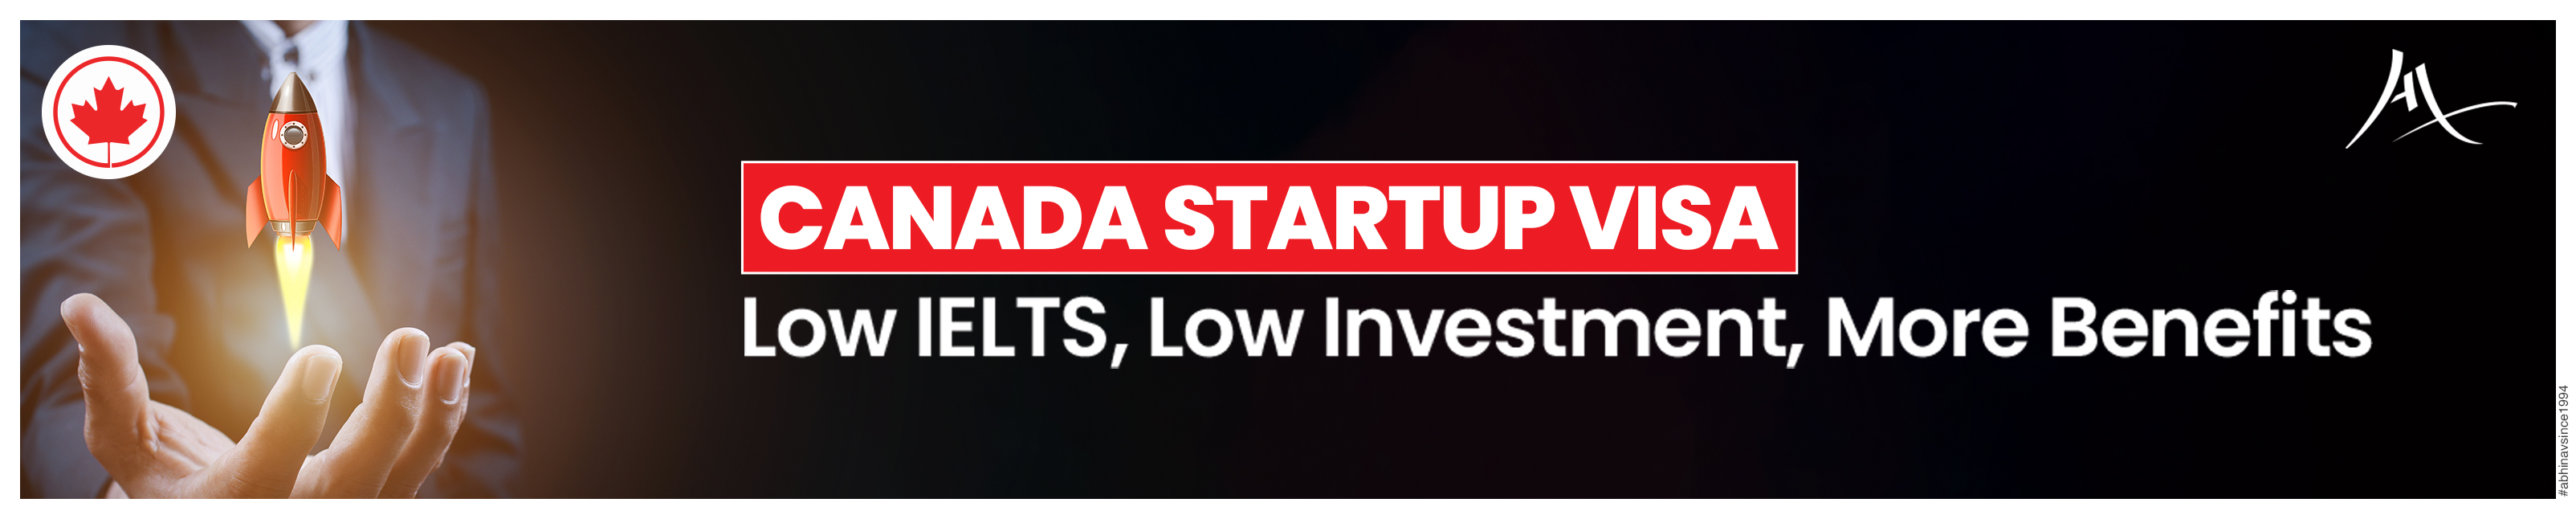 Canada Startup Visa – Low IELTS, Low Investment, More Benefits